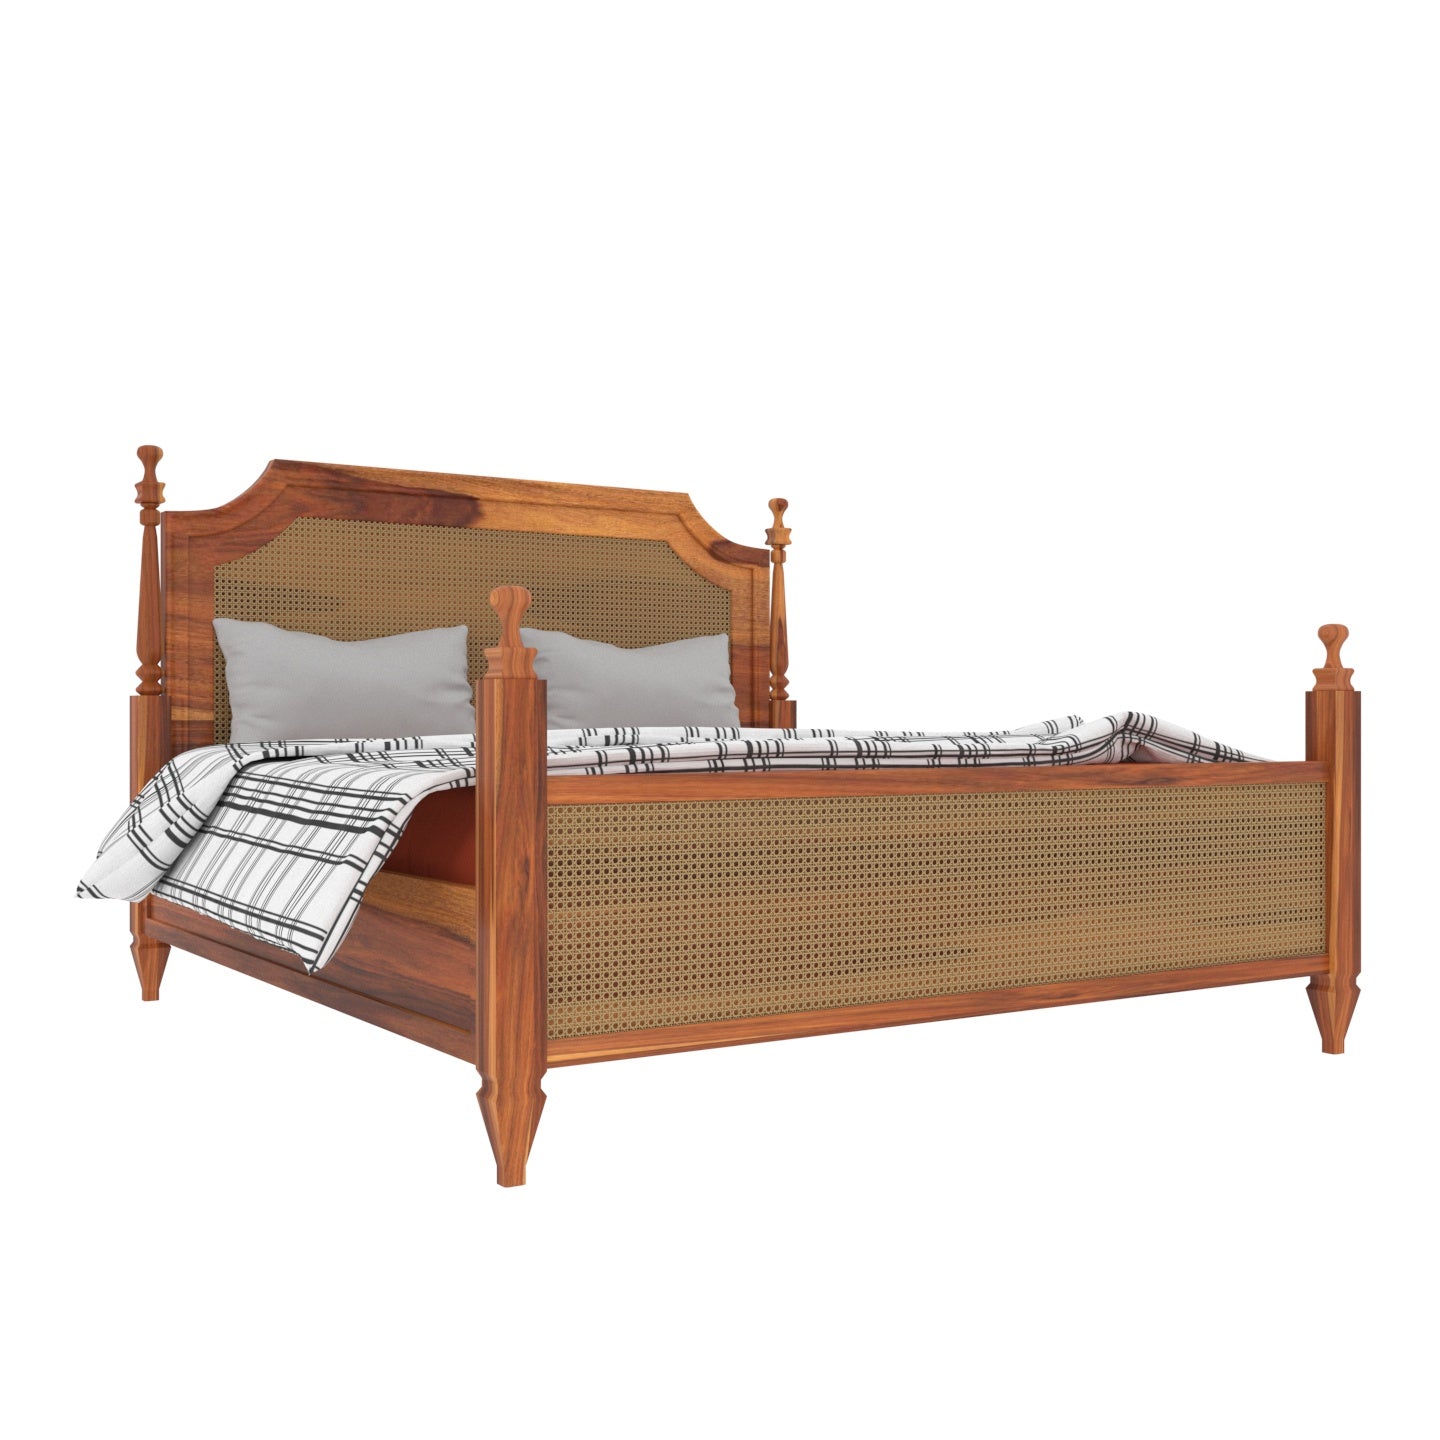 Indian Simple Decent Handmade Wooden Bed with Classic Arm Chair Bedroom Furniture Sets